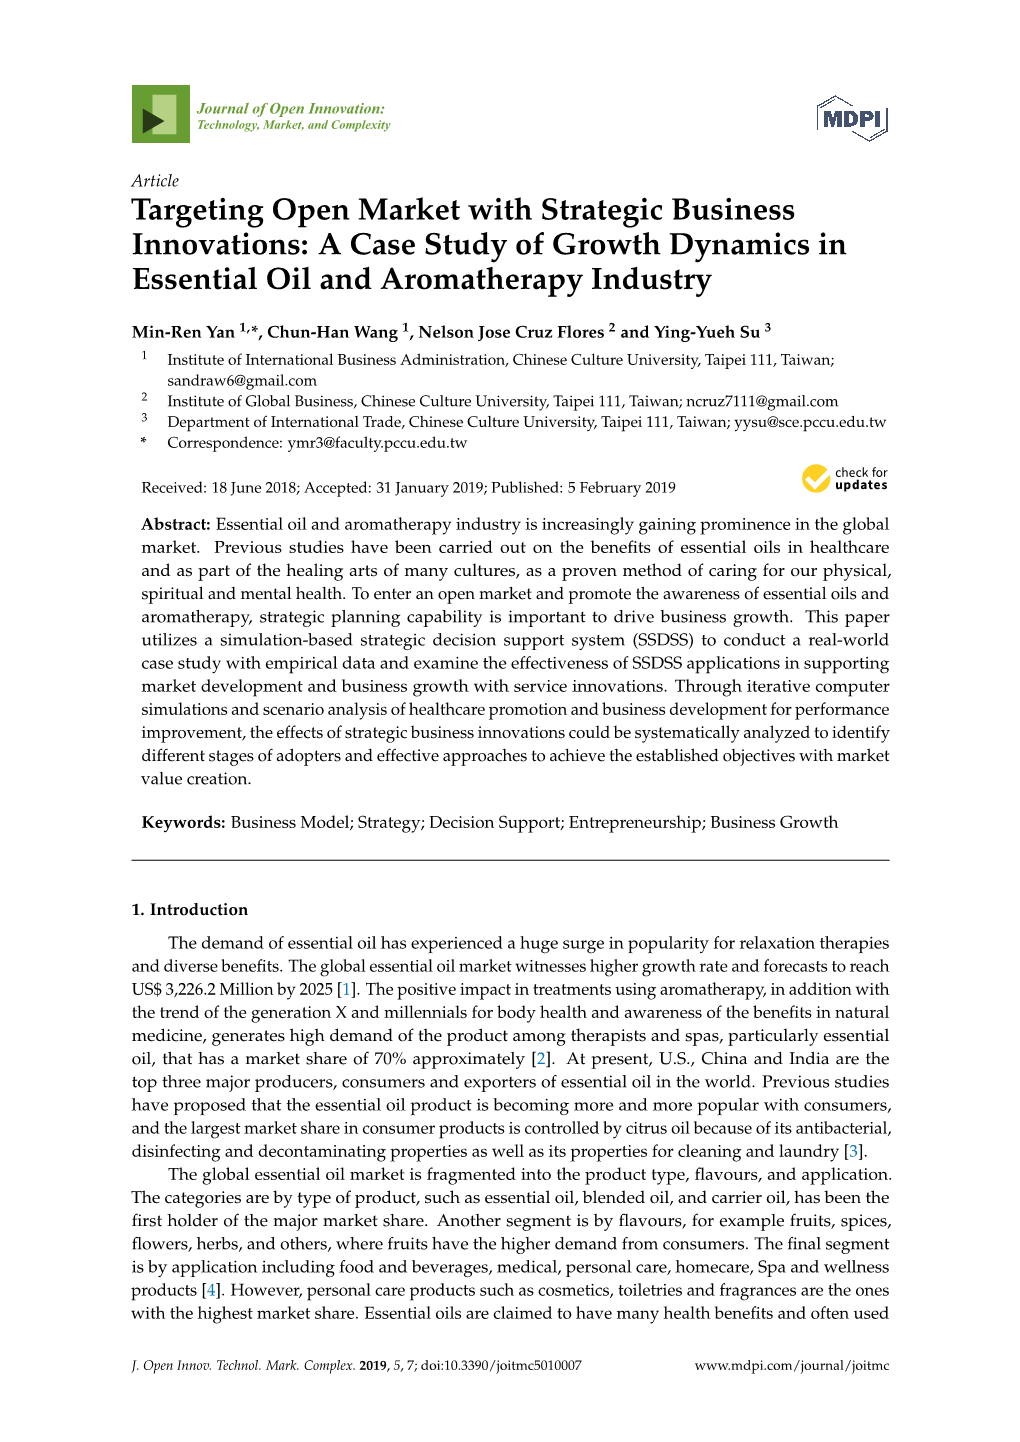 A Case Study of Growth Dynamics in Essential Oil and Aromatherapy Industry